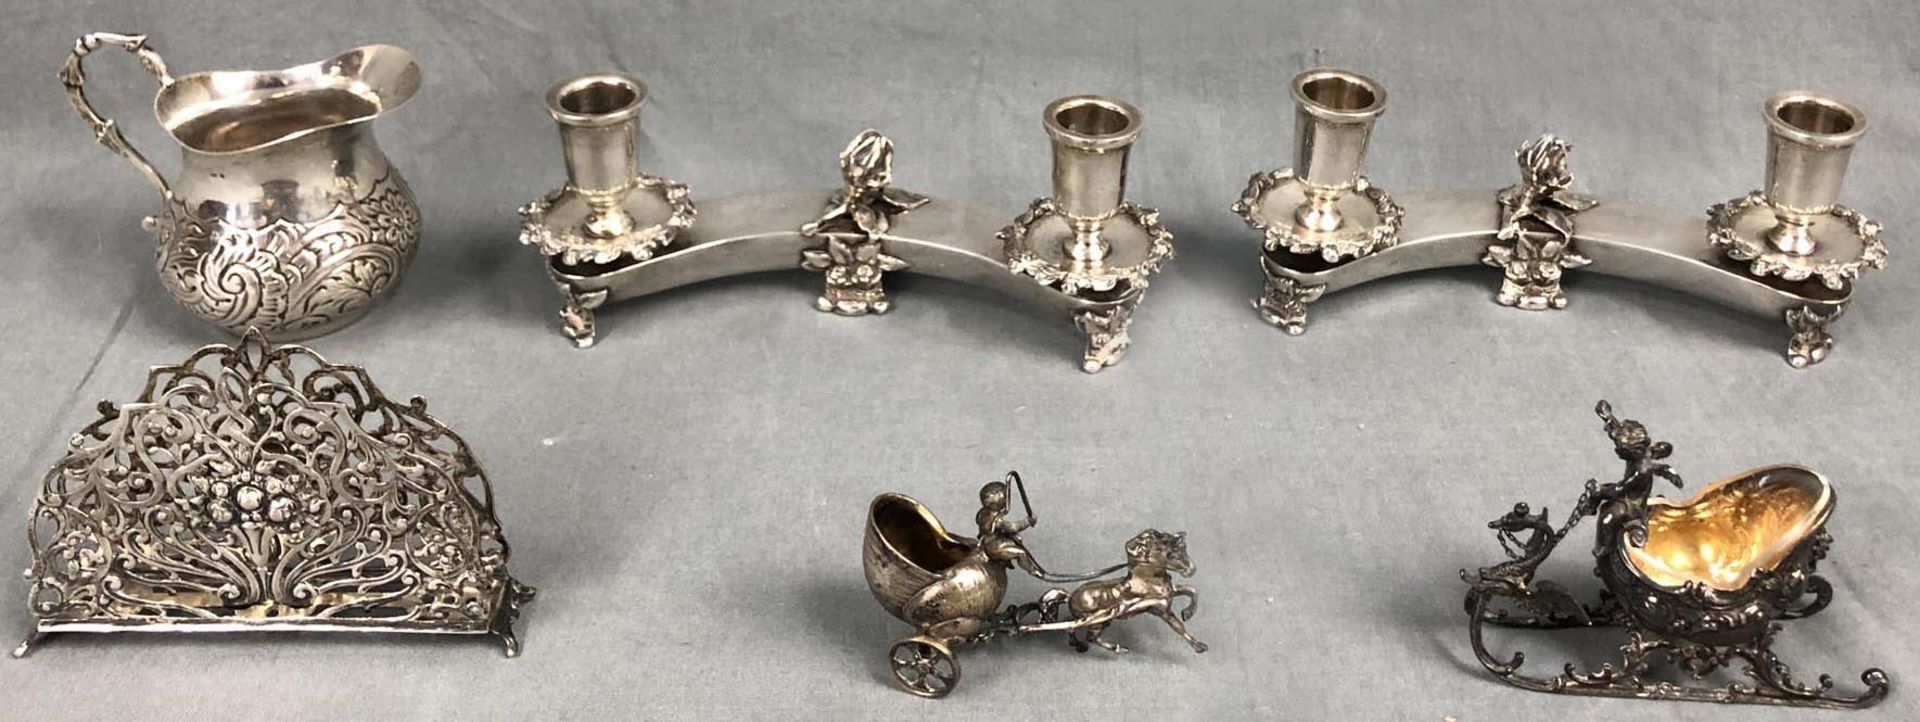 Silver. Some items Sterling.(12 + 13 + 15 + 41). 3084 grams gross. In addition 2 boxes.Silber. - Bild 7 aus 14